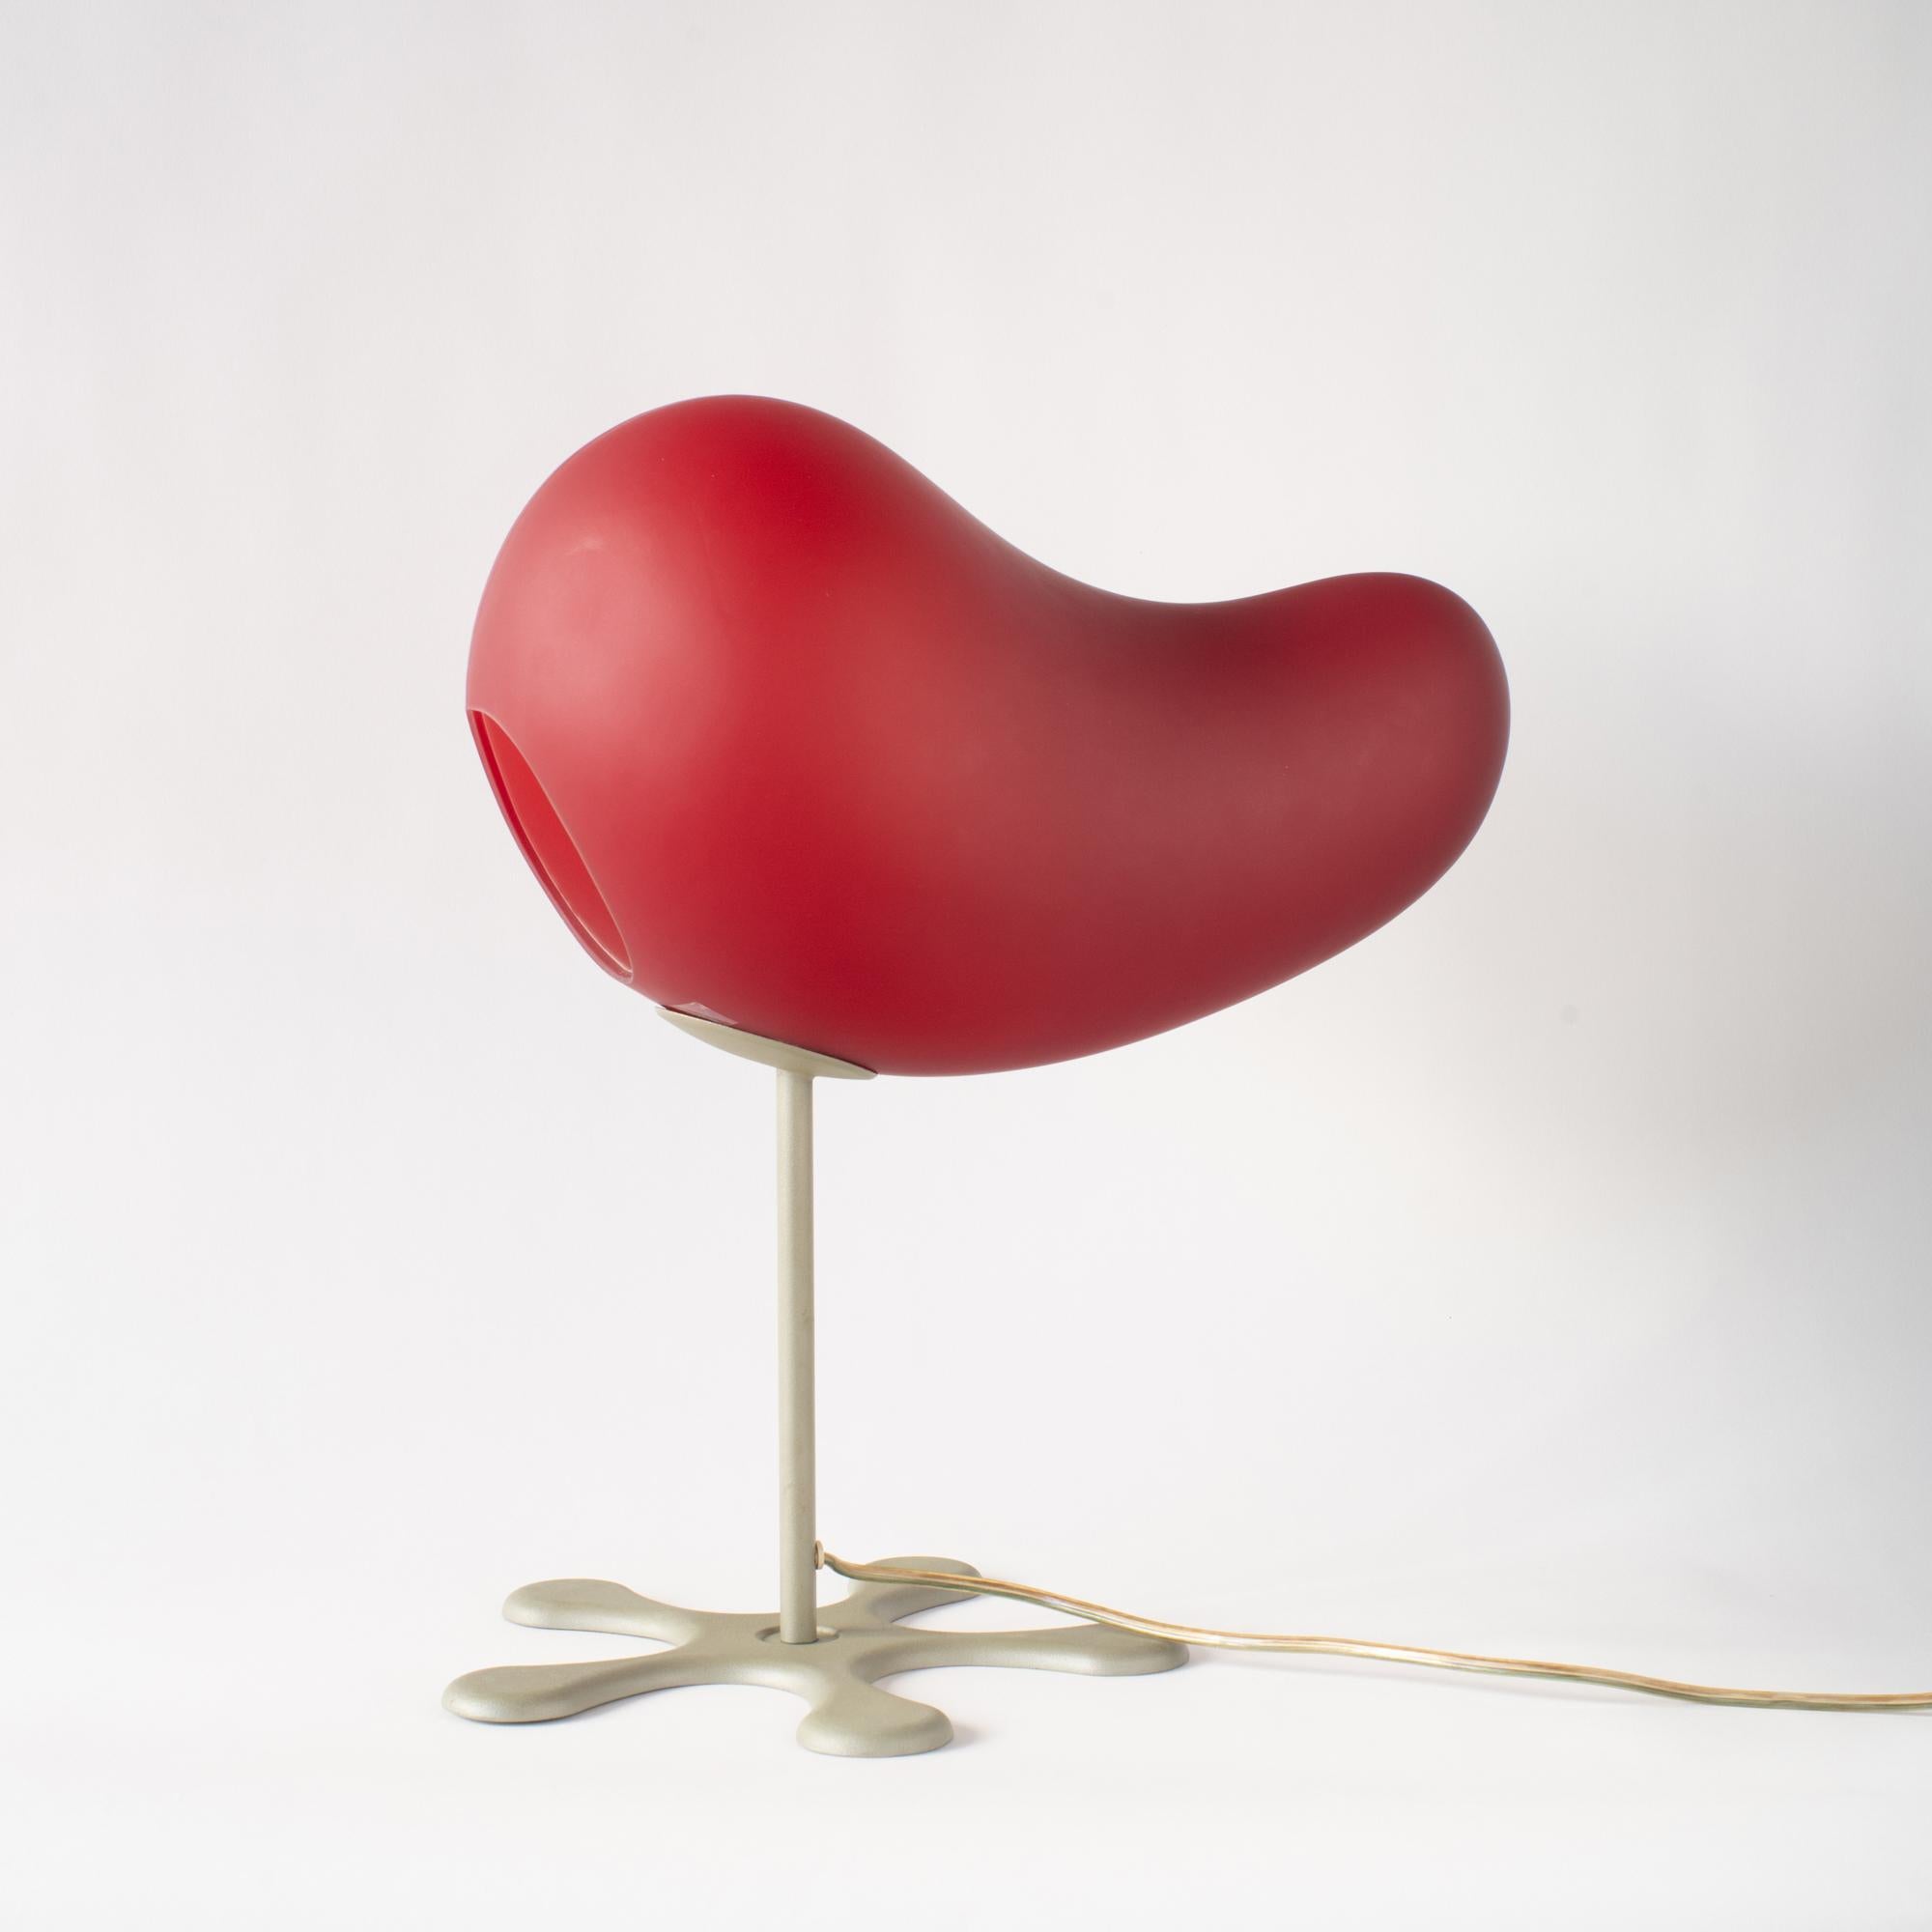 Table lamp in red.  It was designed in 2000 by Aldo Cibic. Shade is made of glass. Les is made of steel painted.
It's the style in Y2K interior and design. Also really great example in that era. 
 